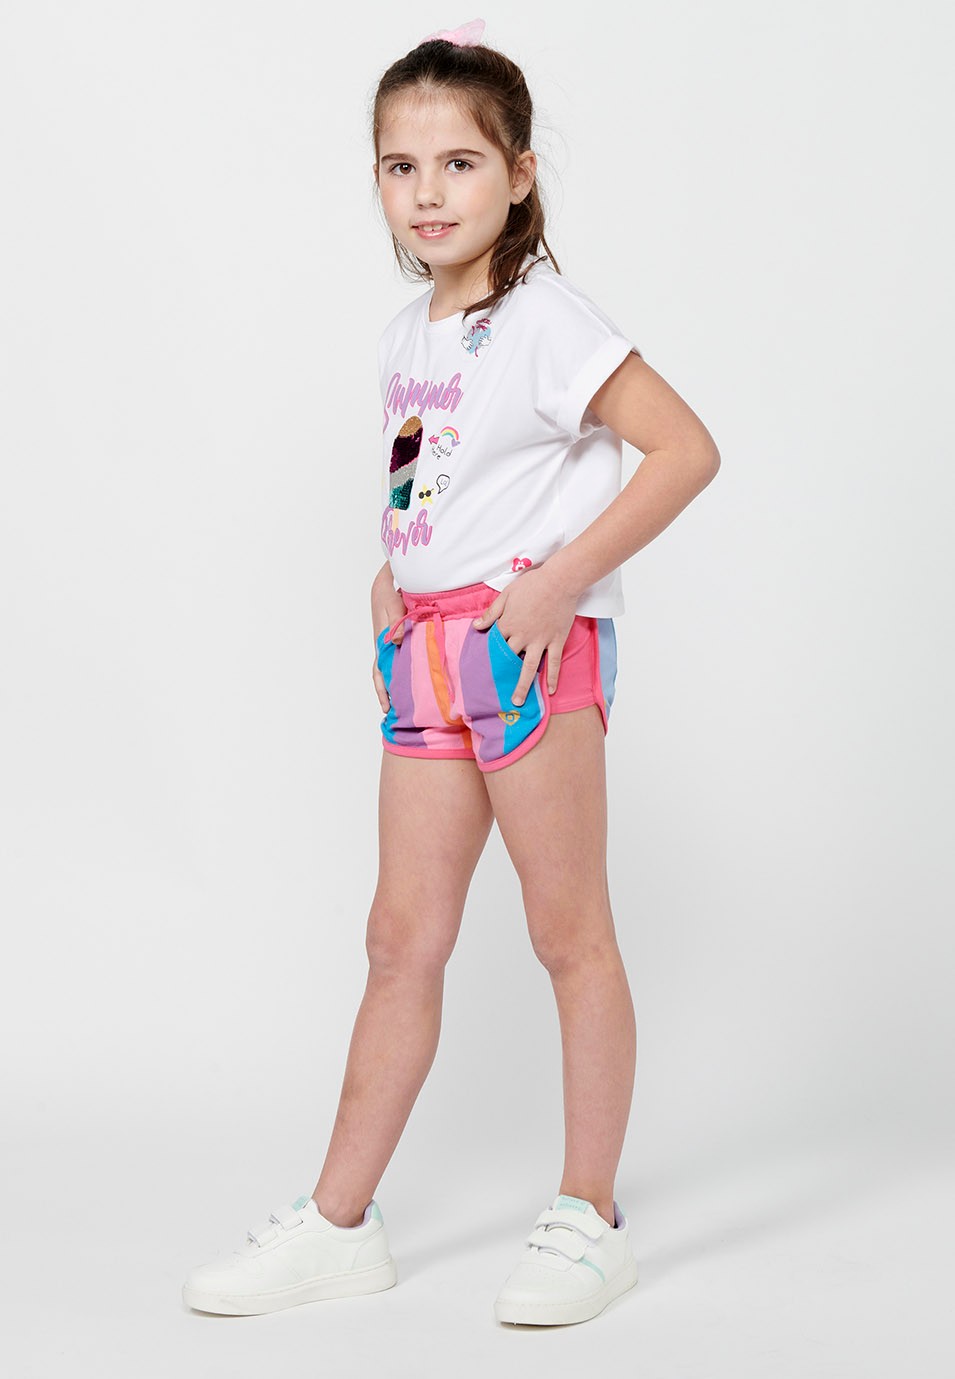 Pink Shorts with Adjustable Rubberized Waistband with Drawstring and Striped Fabric for Girls 2